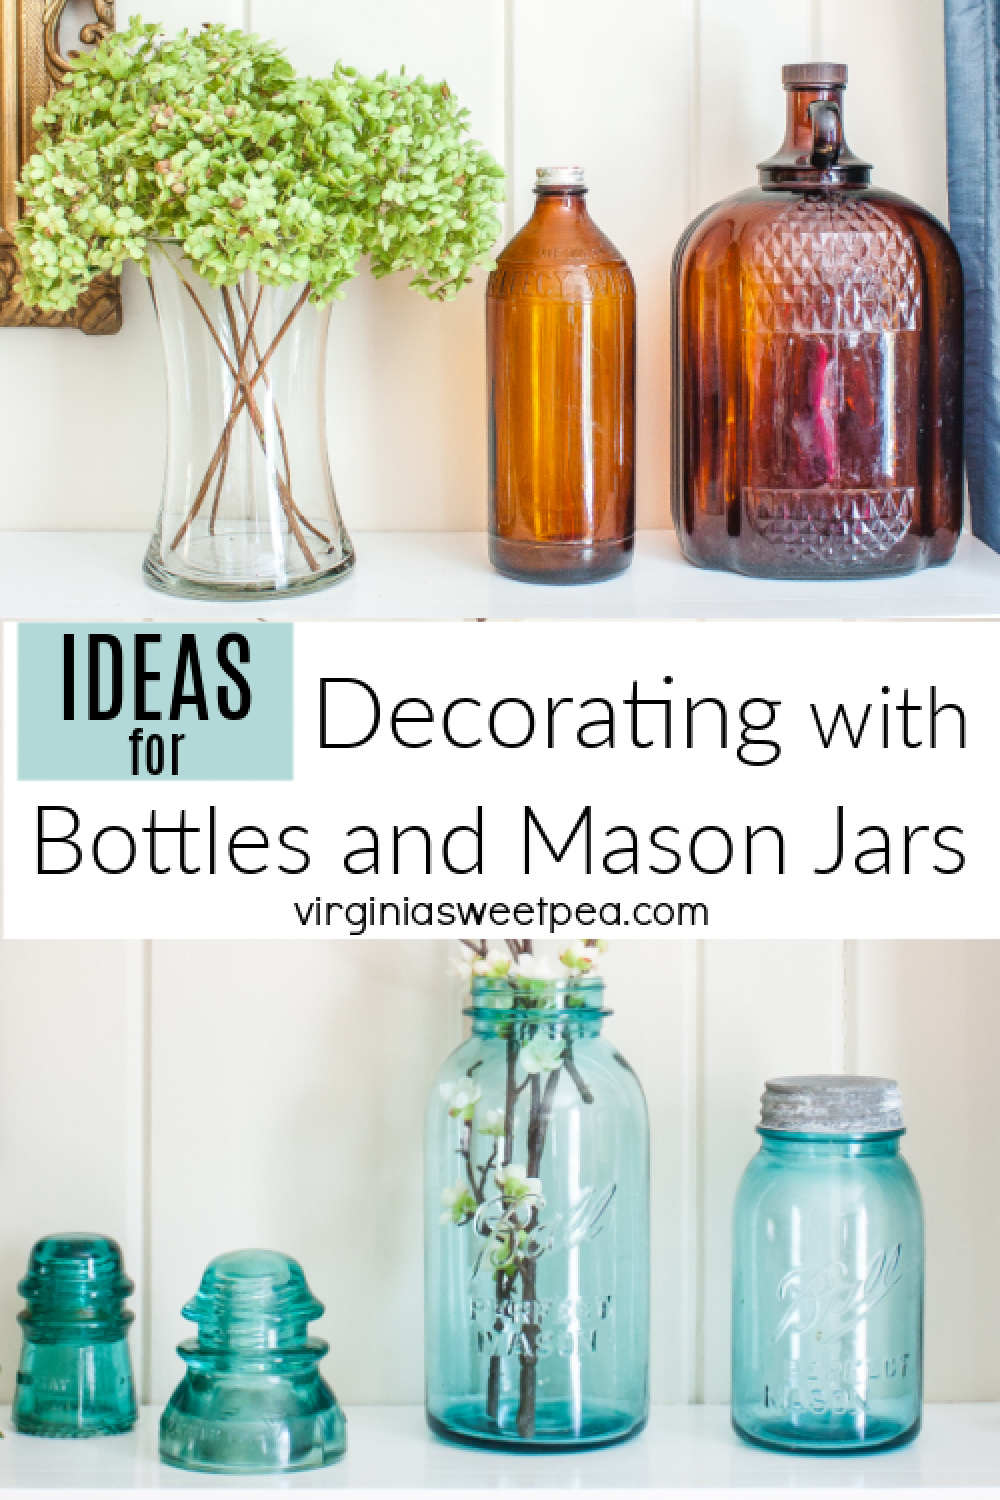 https://www.virginiasweetpea.com/wp-content/uploads/2020/09/Ideas-for-Decorating-with-Vintage-Bottles-and-Mason-Jars.jpg